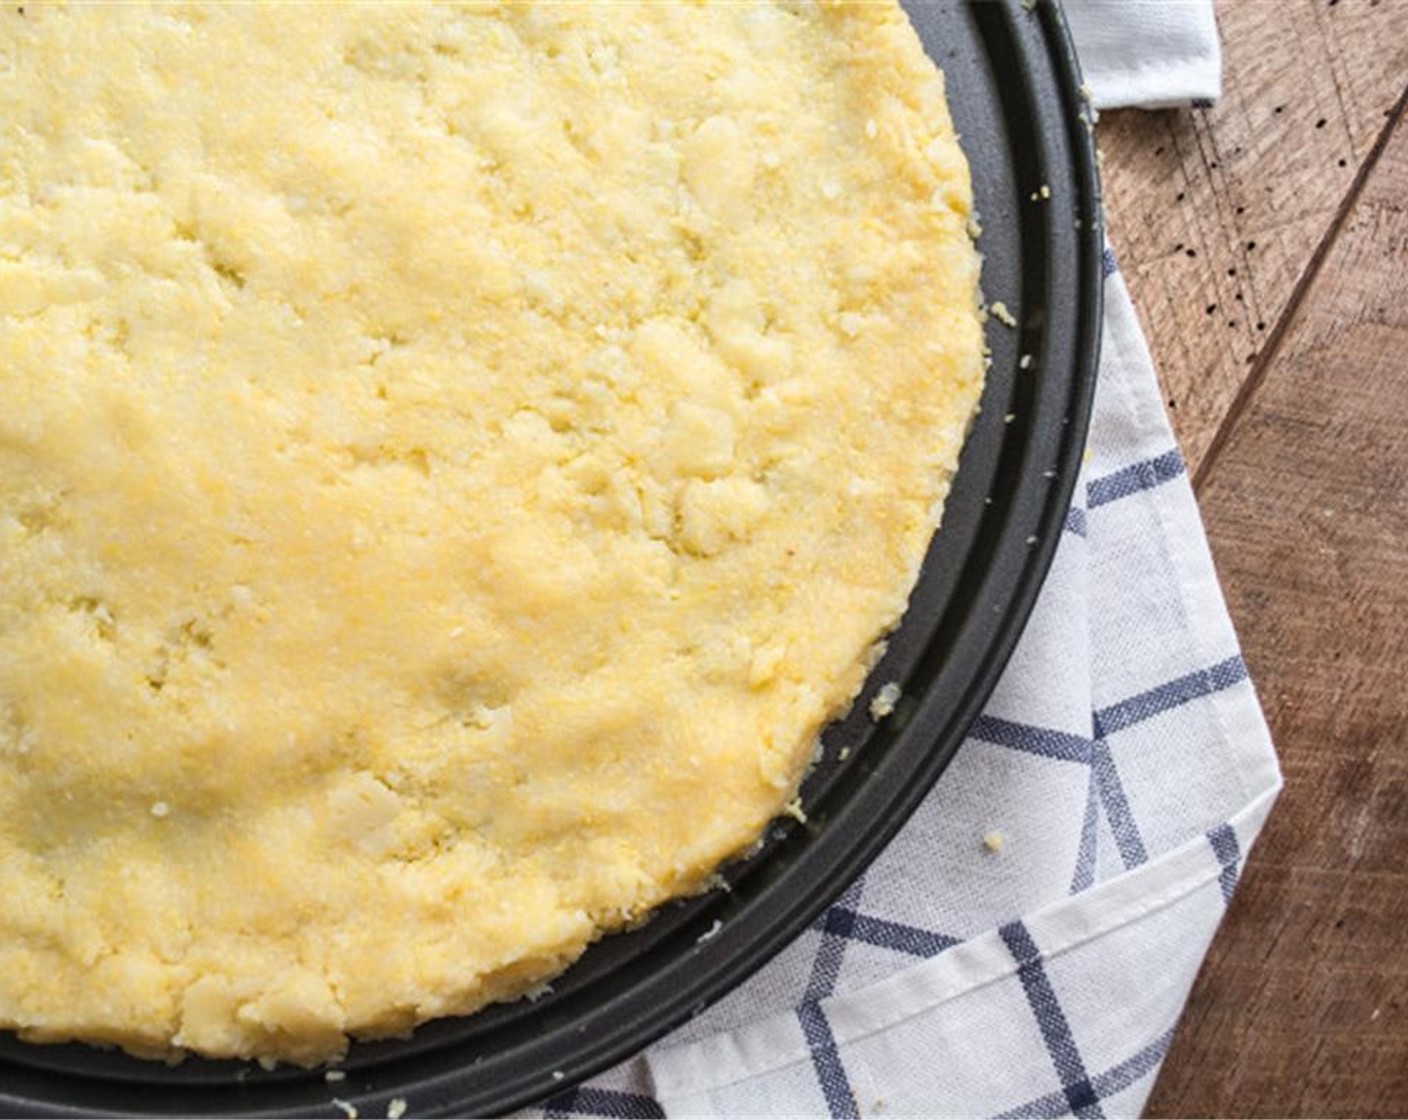 step 3 Add Polenta (1 pckg) and Coconut Oil (1/2 Tbsp) to a bowl and mix. Spread the polenta mixture out on the pan until it is approximately ⅓-inch thick and evenly covers the round pan.